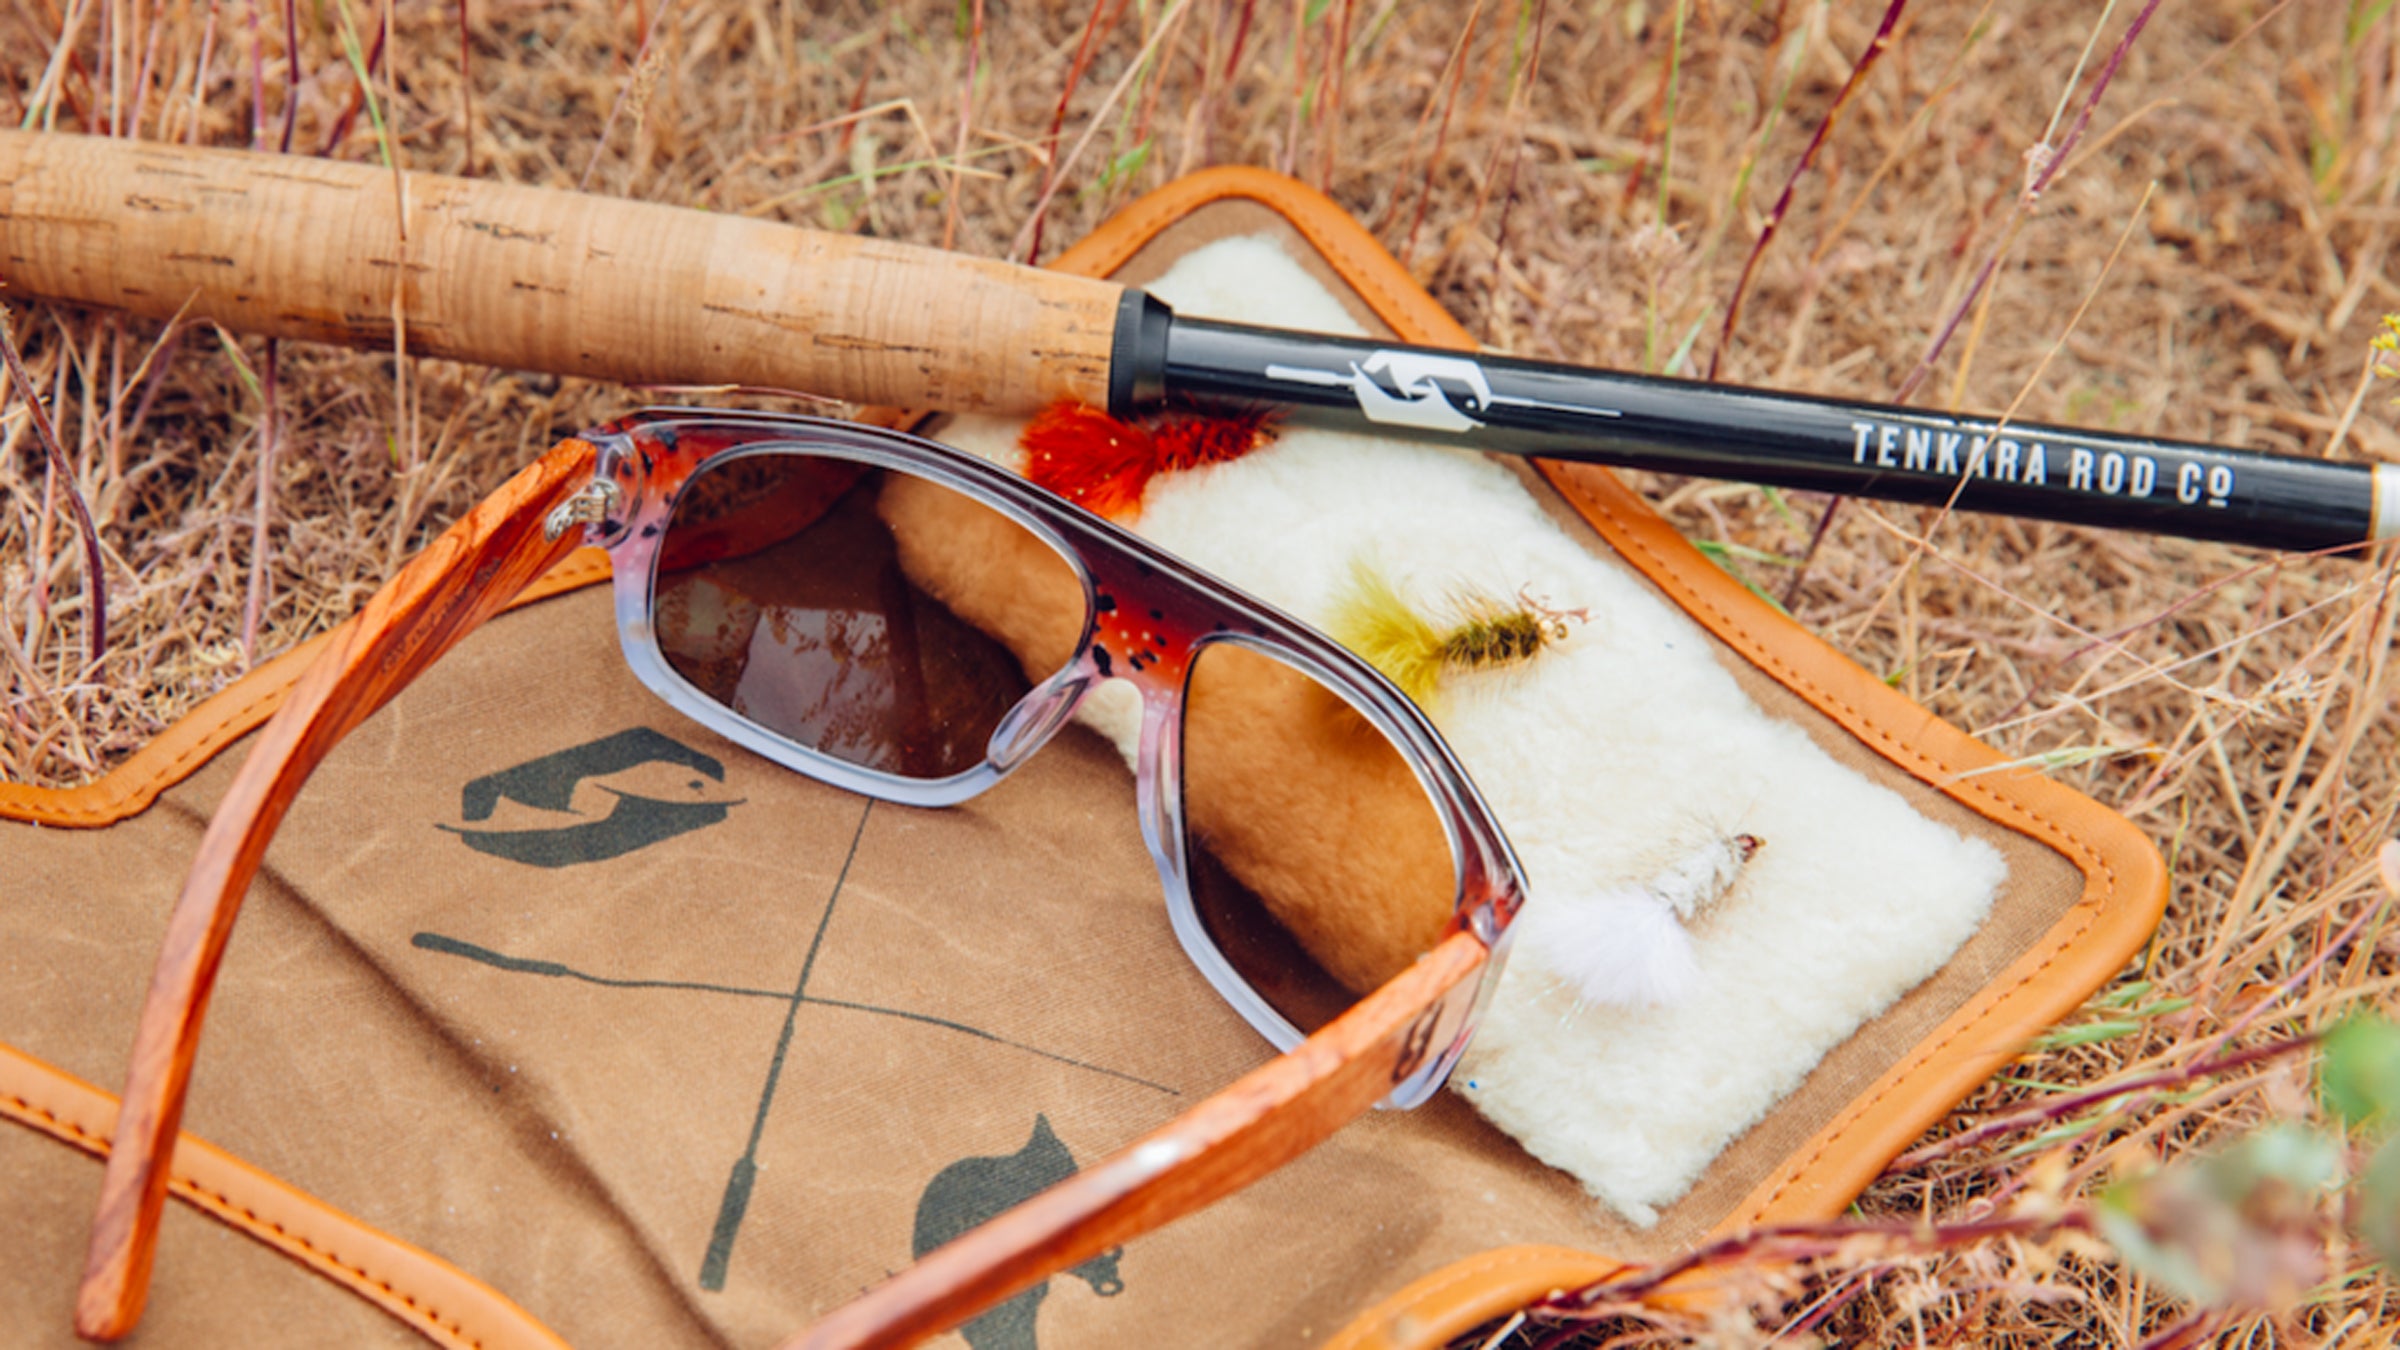 Tenkara Rod Co. and Proof Glasses Package